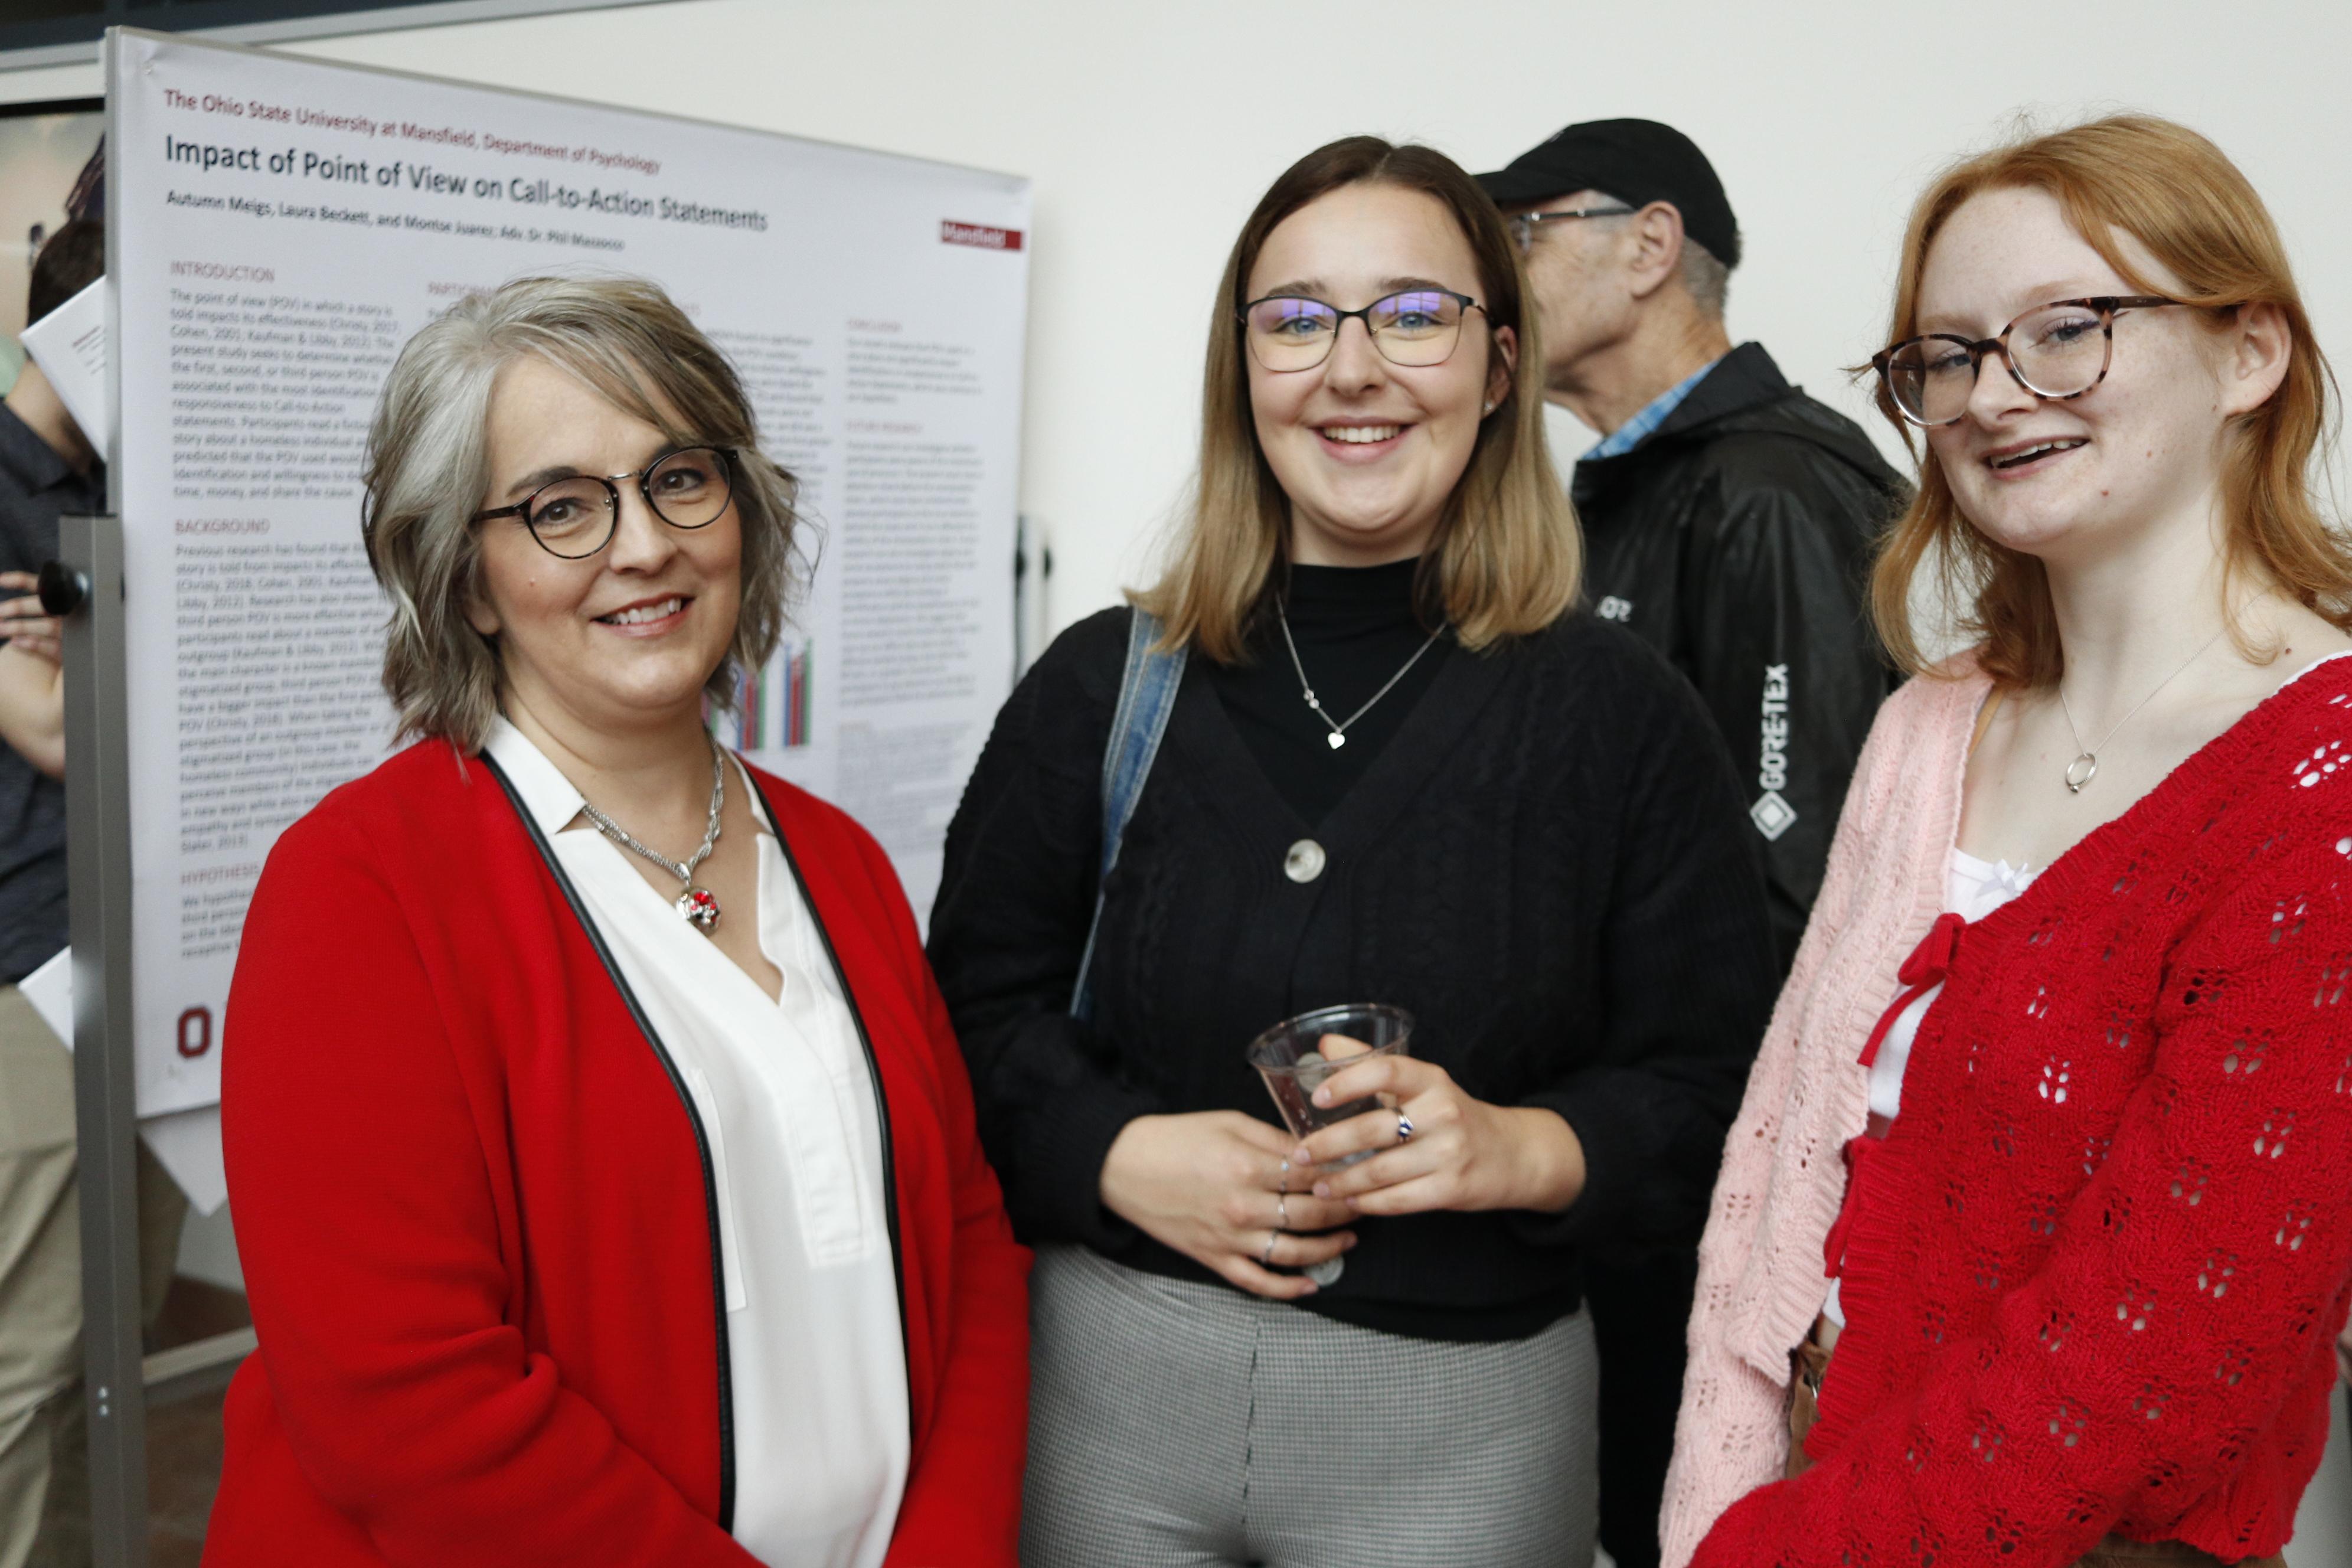 three women smiling posing for the picture in front of a research poster